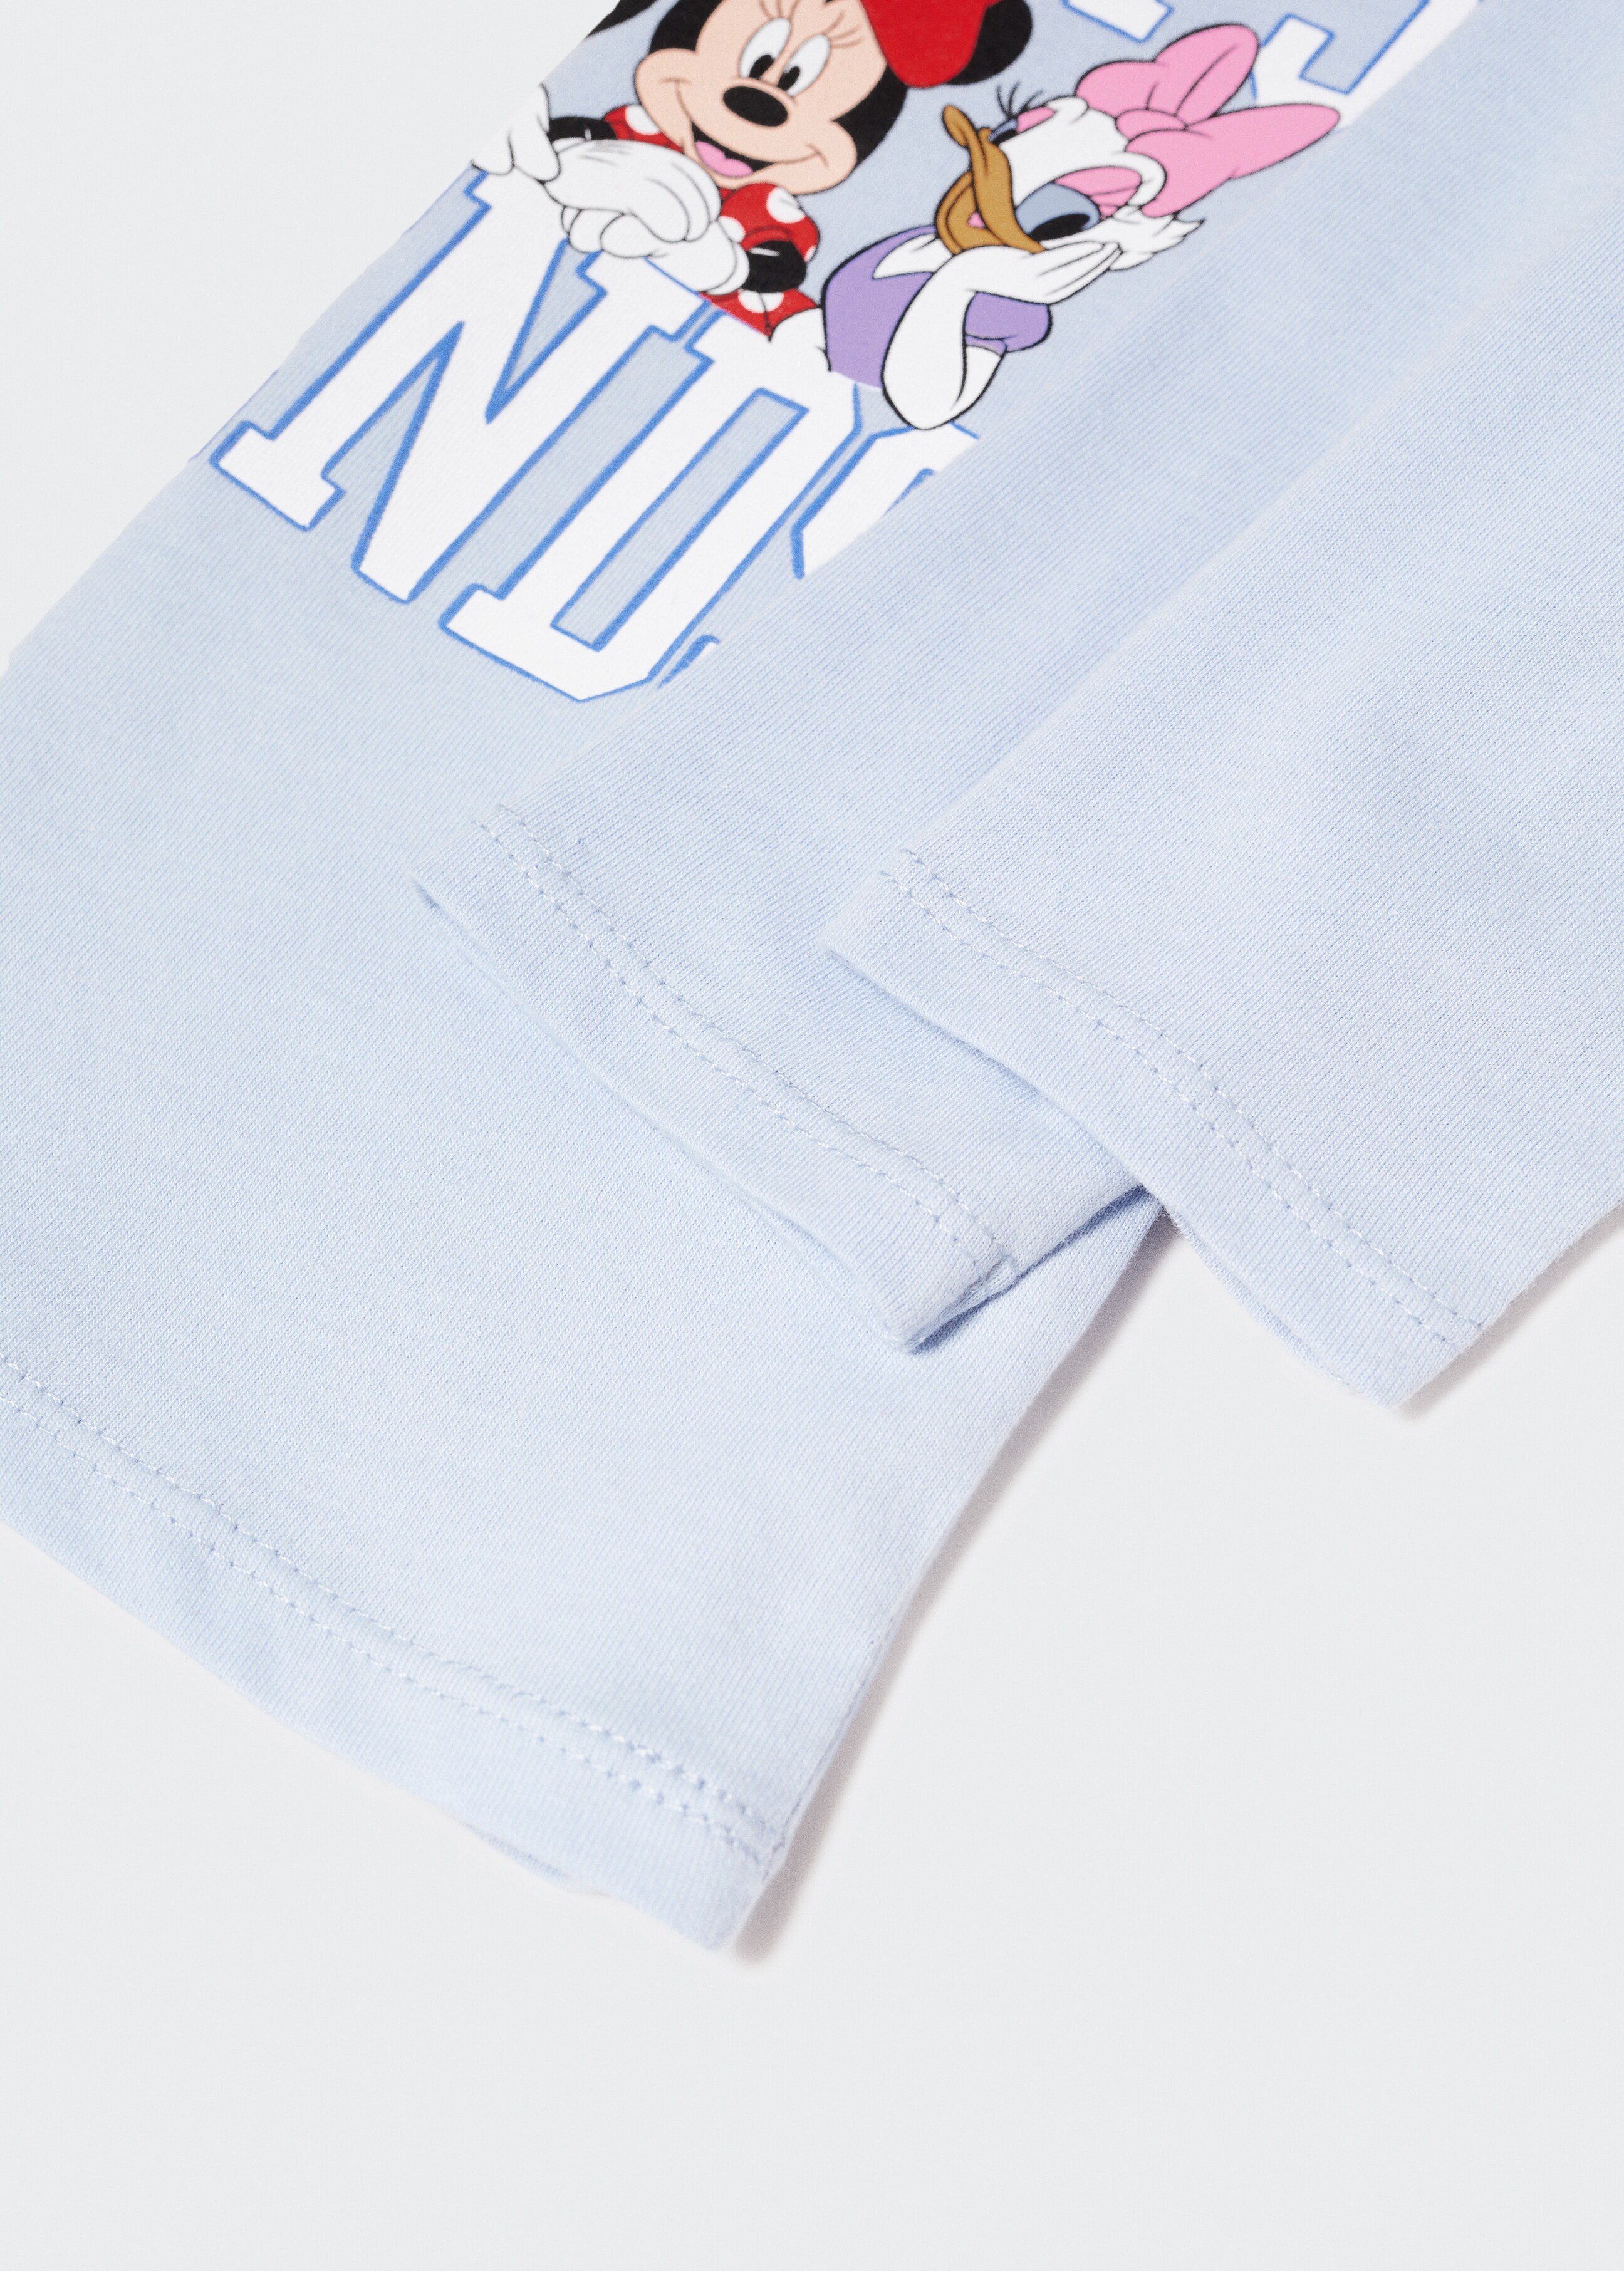 Disney long-sleeved t-shirt - Details of the article 8